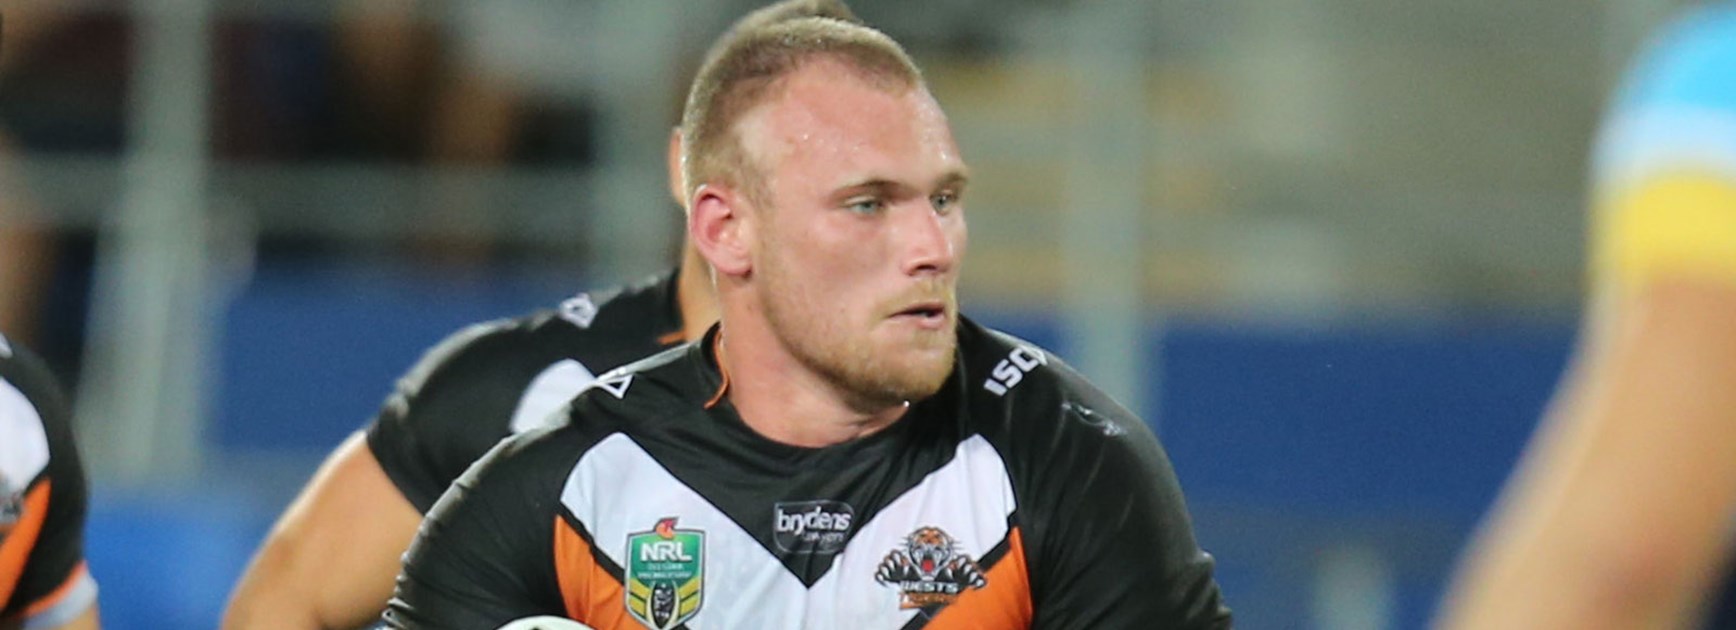 Having played against the Titans Matthew Lodge has been stood down from the Wests Tigers' Round 2 clash.